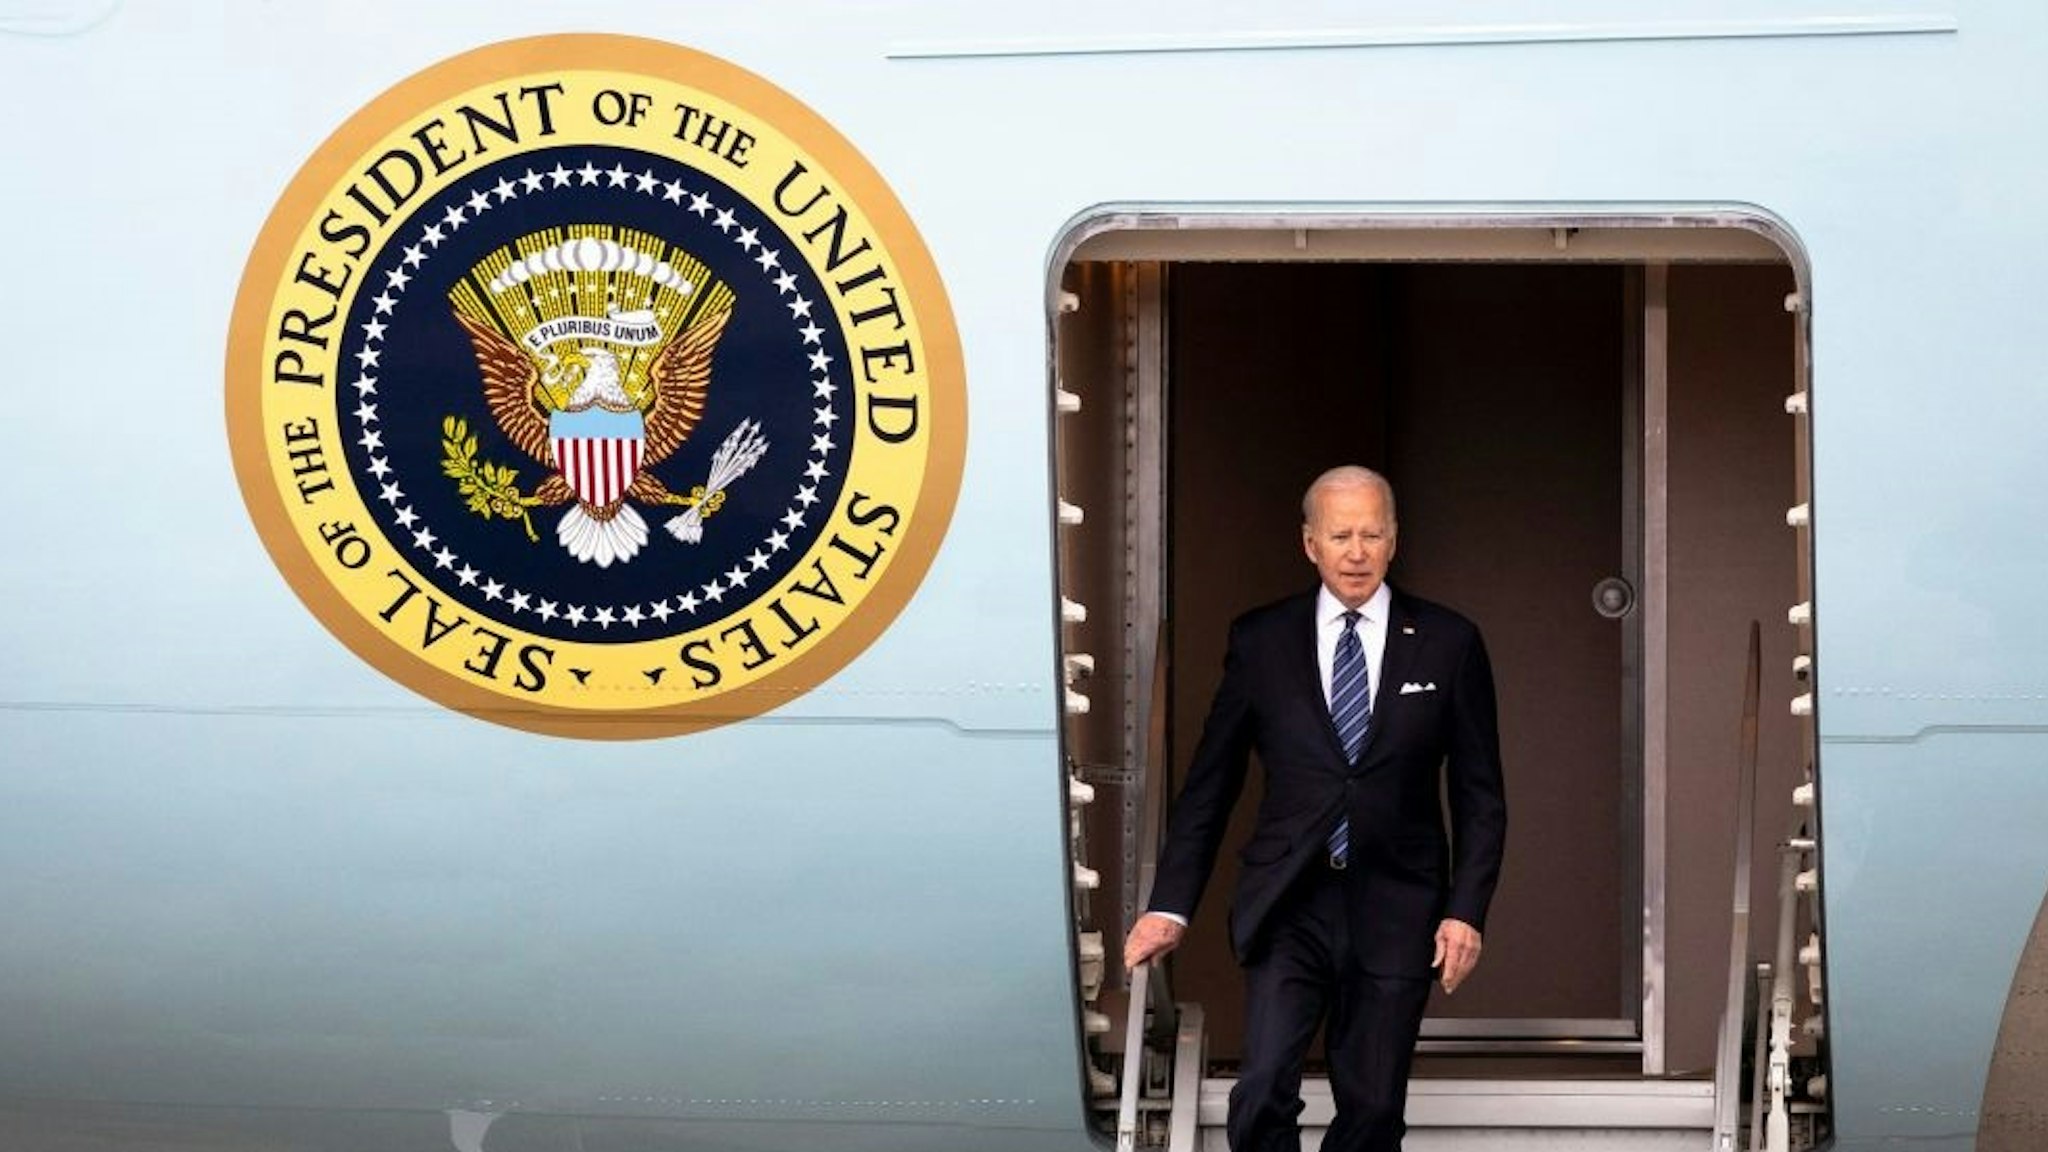 US President Joe Biden disembarks from Air Force One at Minneapolis-Sait Paul International Airport in Minneapolis, Minnesota, on May 1, 2022. - Biden is traveling to Minneapolis, Minnesota, for the memorial service of former Vice President Walter Mondale. (Photo by Kerem Yucel / AFP) (Photo by